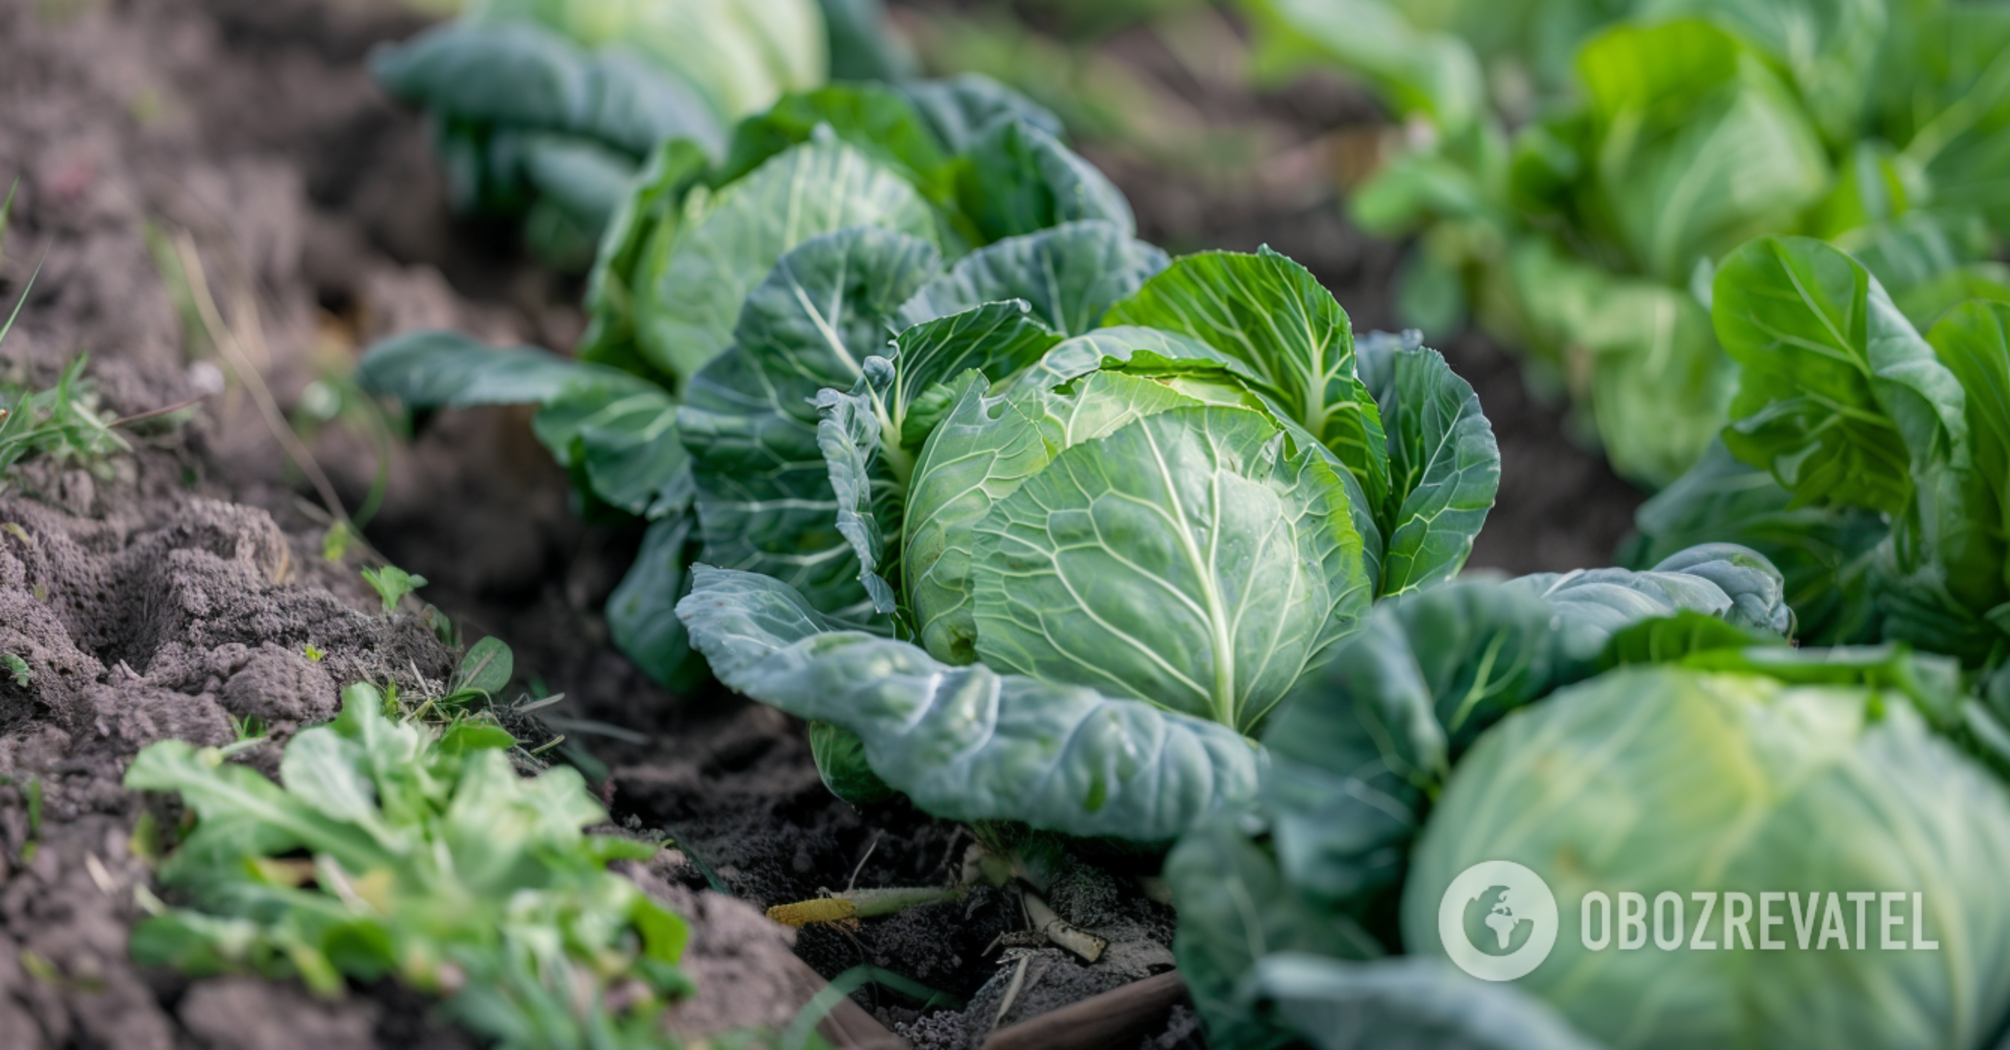 How to save the cabbage crop: an ash and soap solution will protect against pests